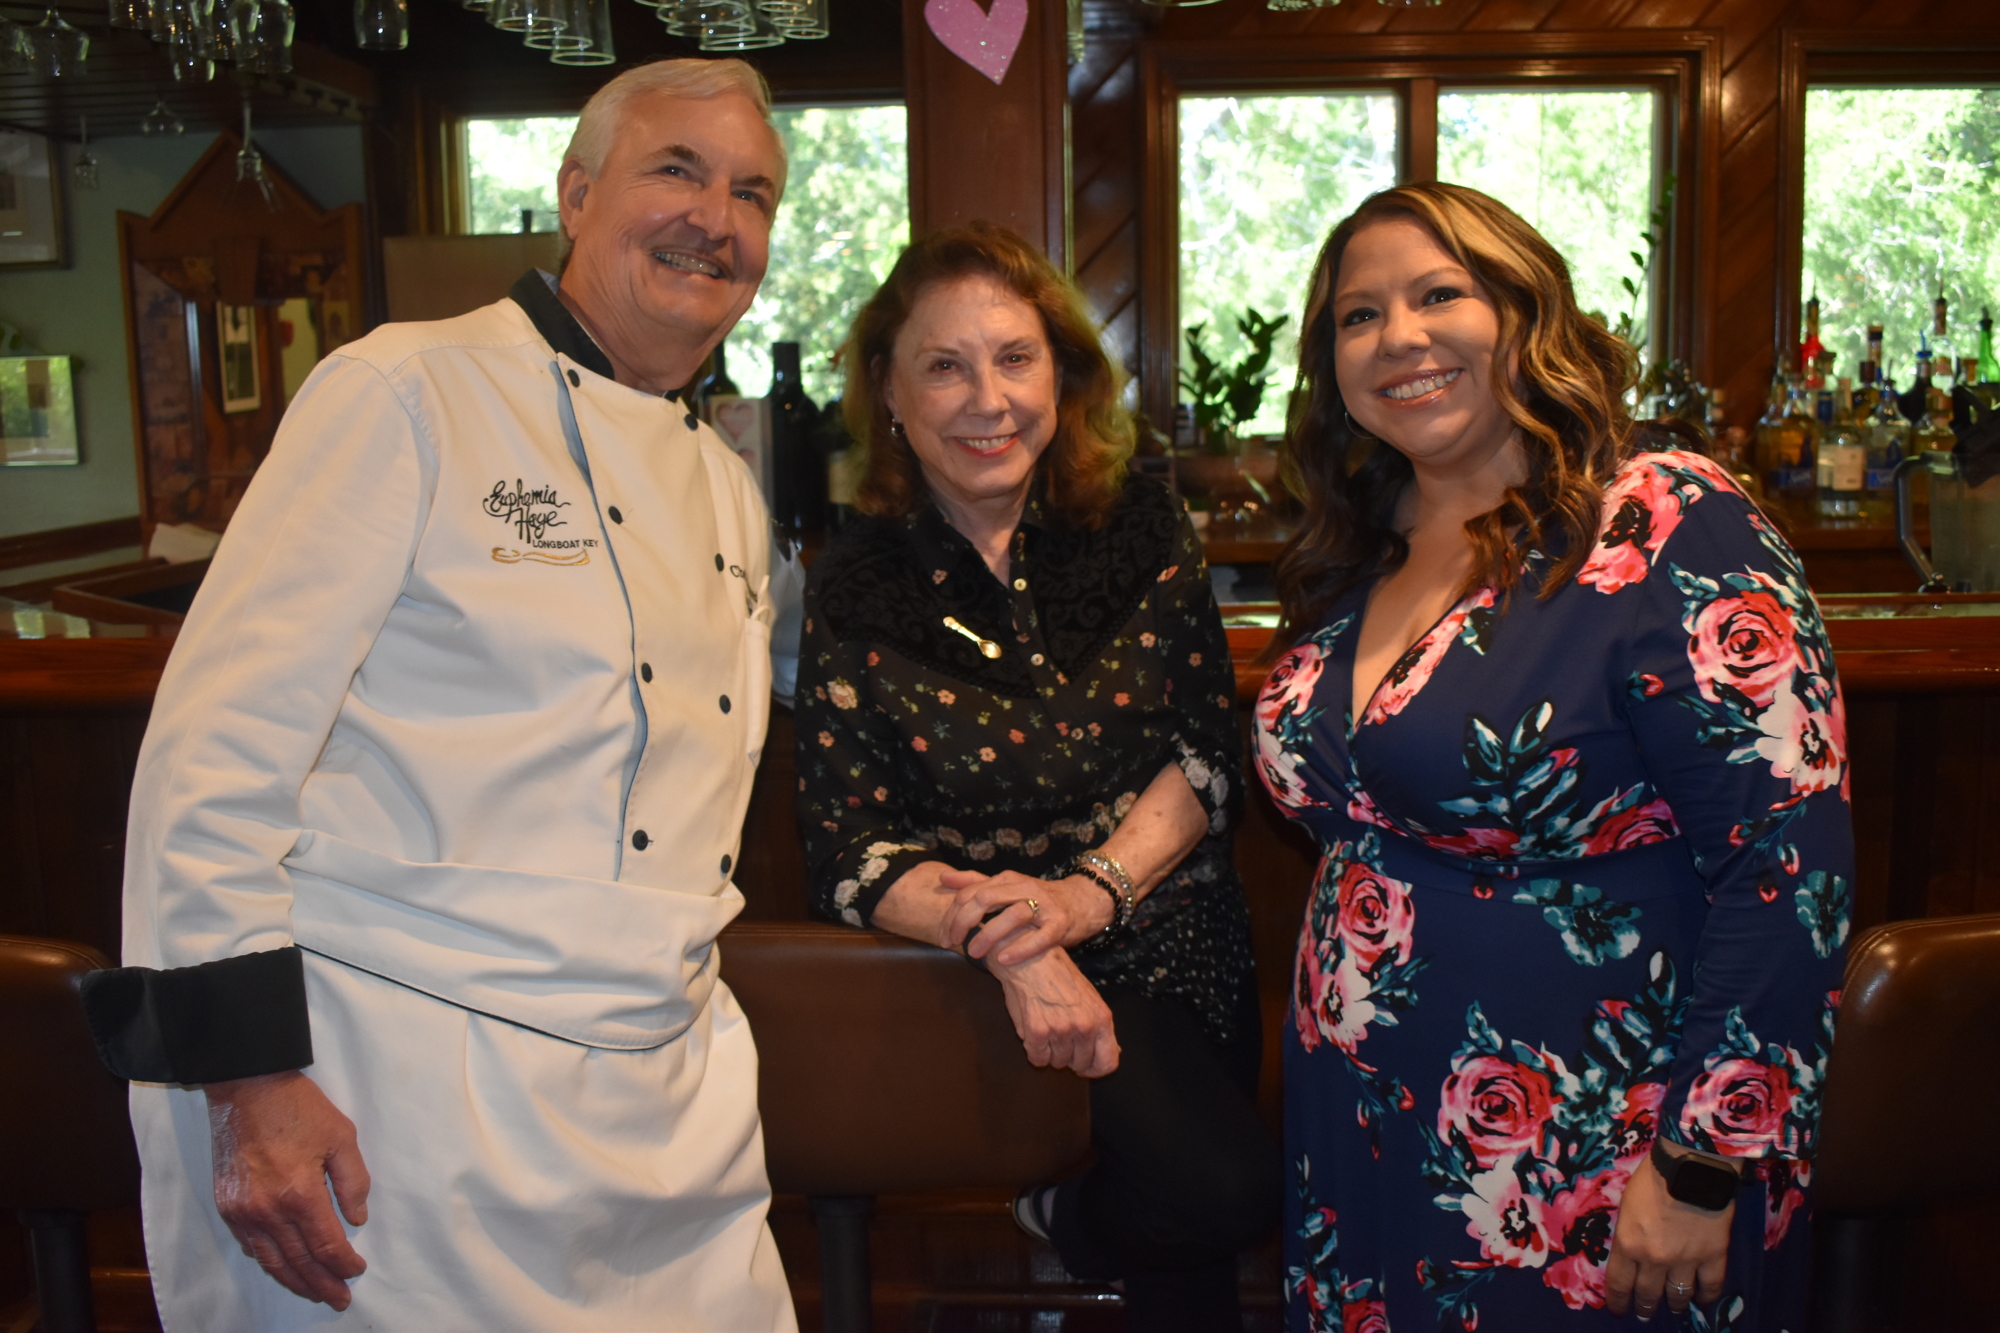 Since May 2007, Amy Whitt (right) has worked with D'Arcy and Ray Arpke at Euphemia Haye. Whitt officially took ownership of the restaurant in December 2021.